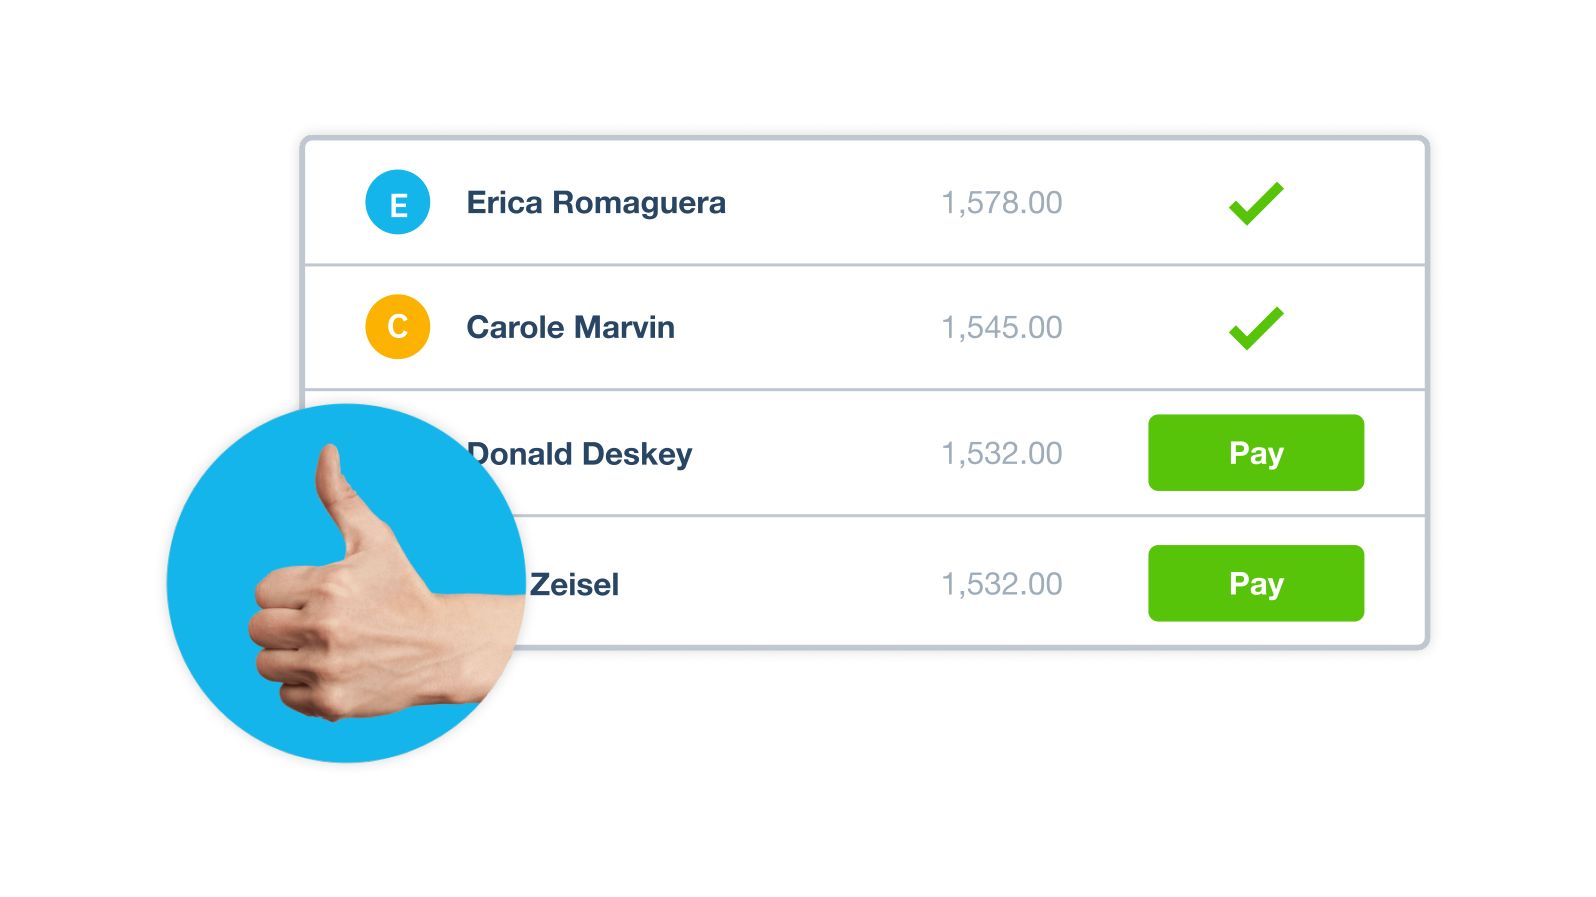 In the payroll software, the names of selected employees and the amount they are to be paid are ticked.